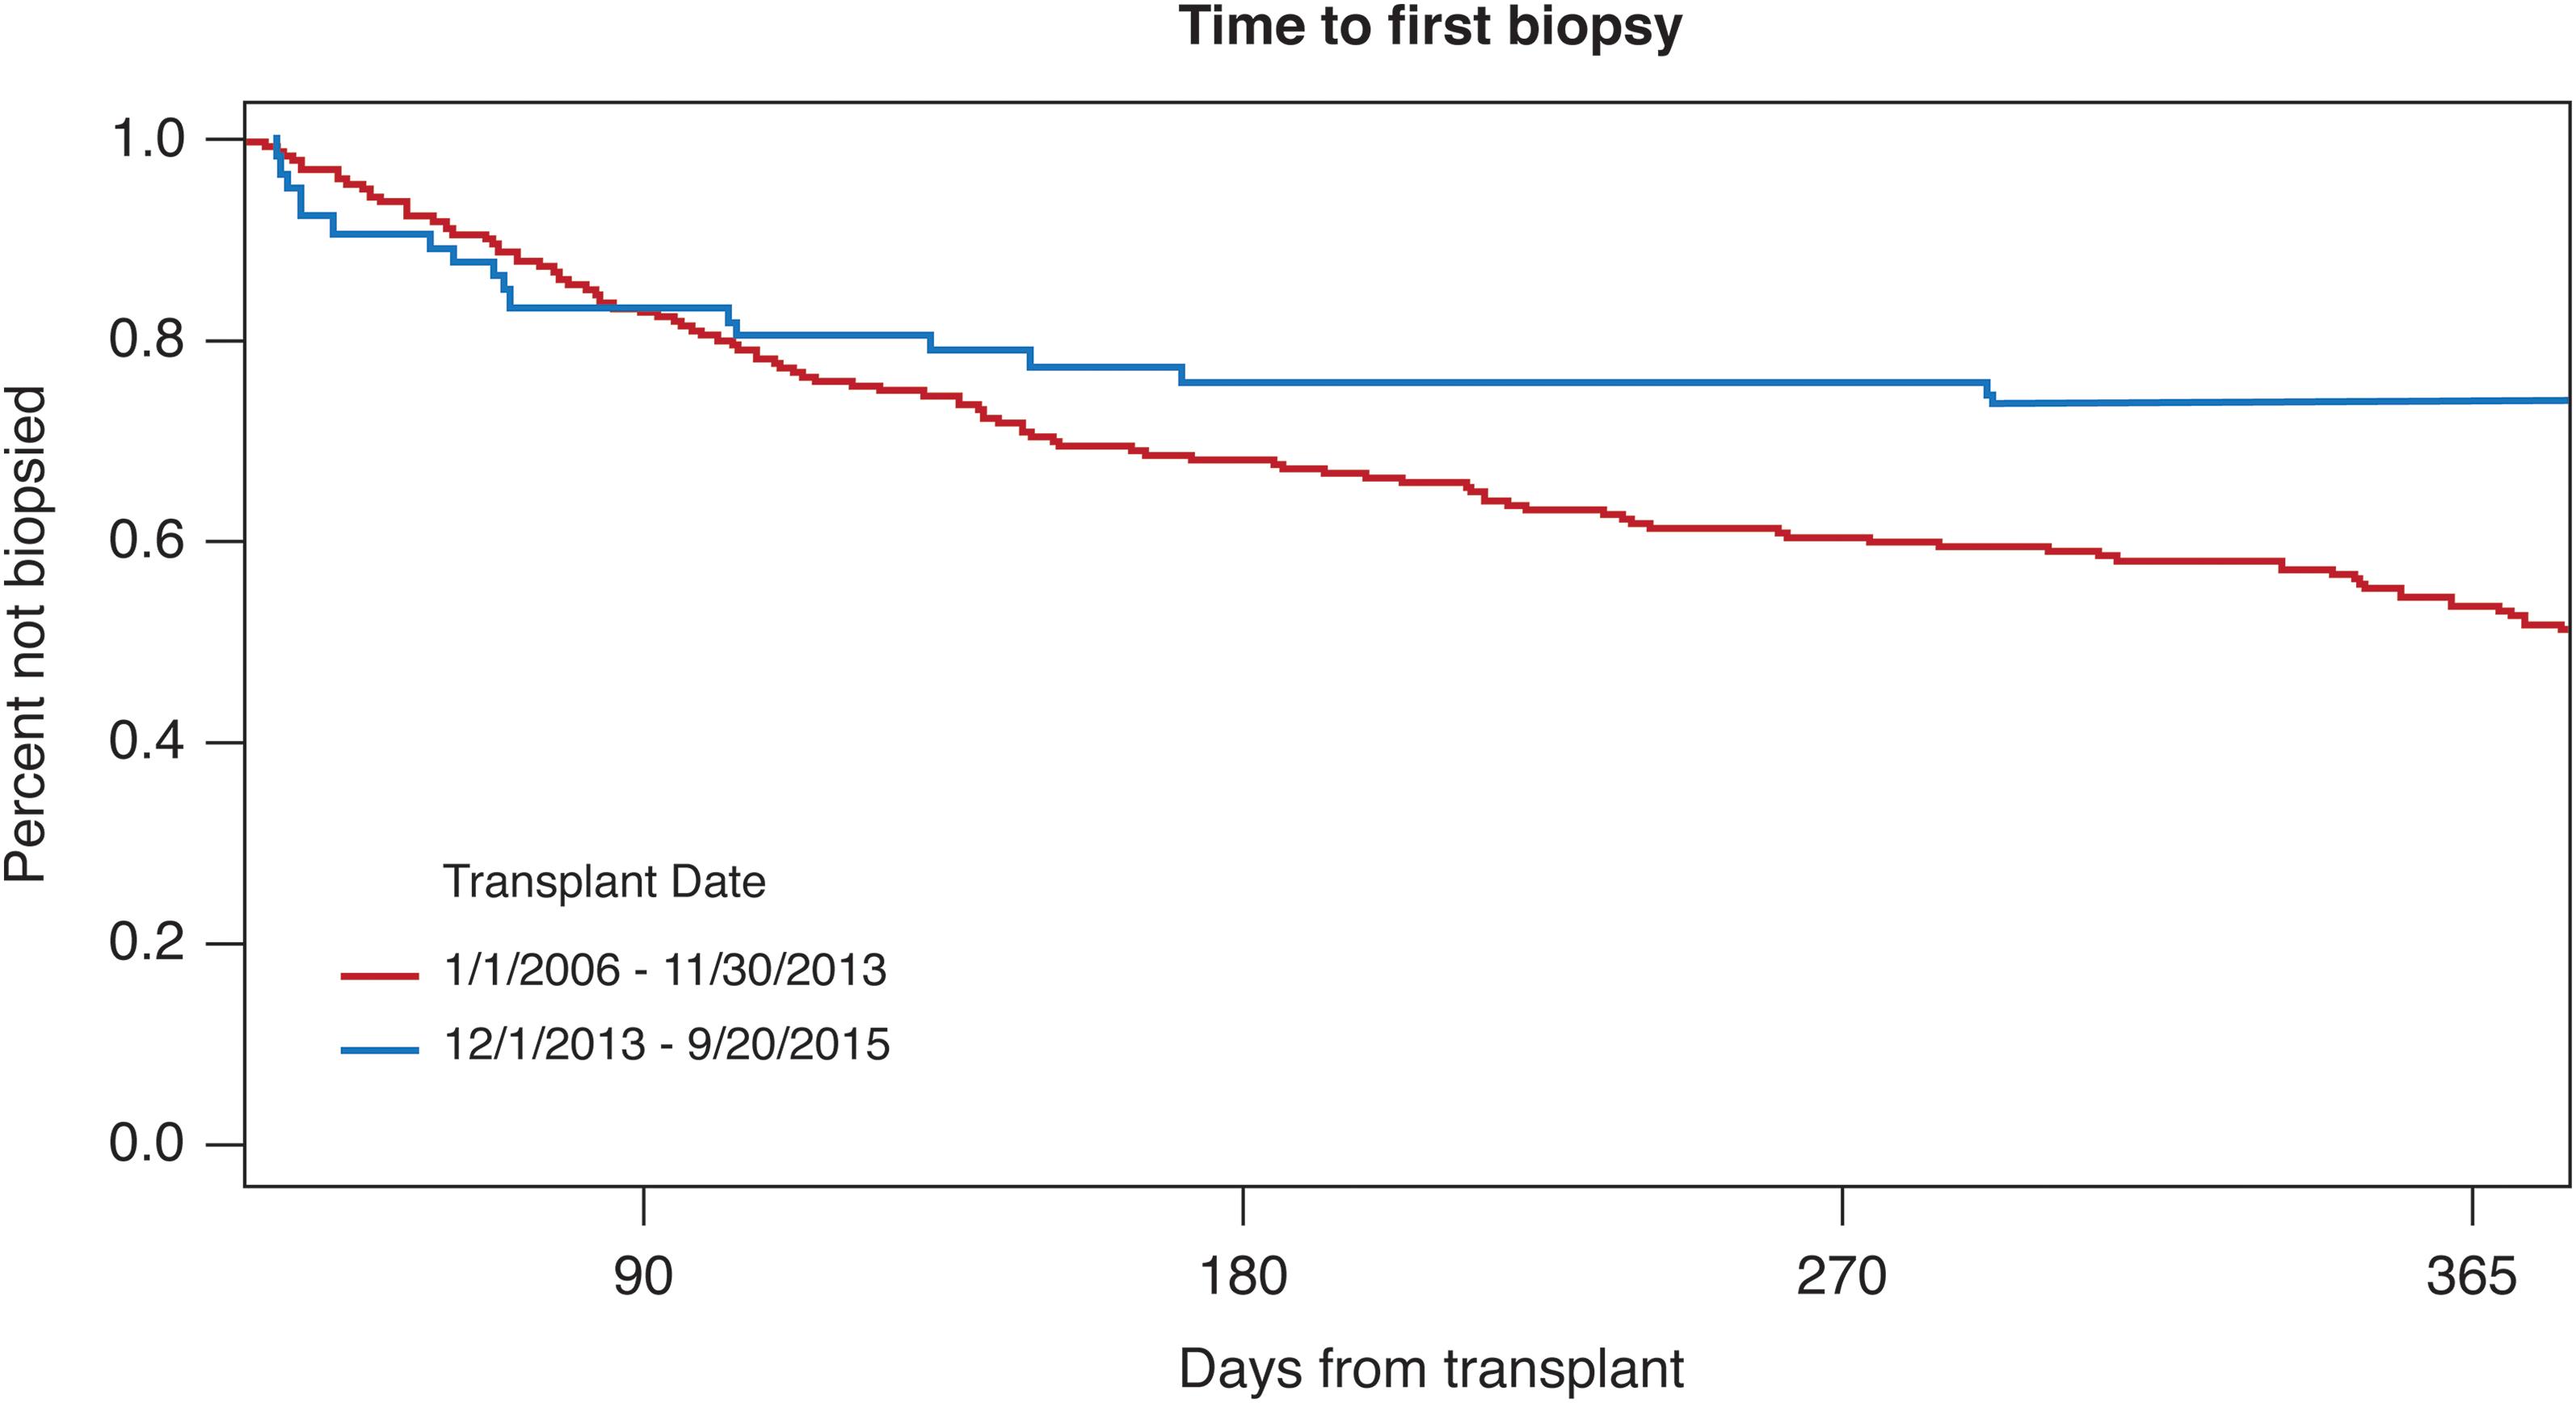 Percentage of patients biopsied post-liver transplant for hepatitis C (HCV), separated by era (<italic>p</italic> = 0.033 at 365 days).